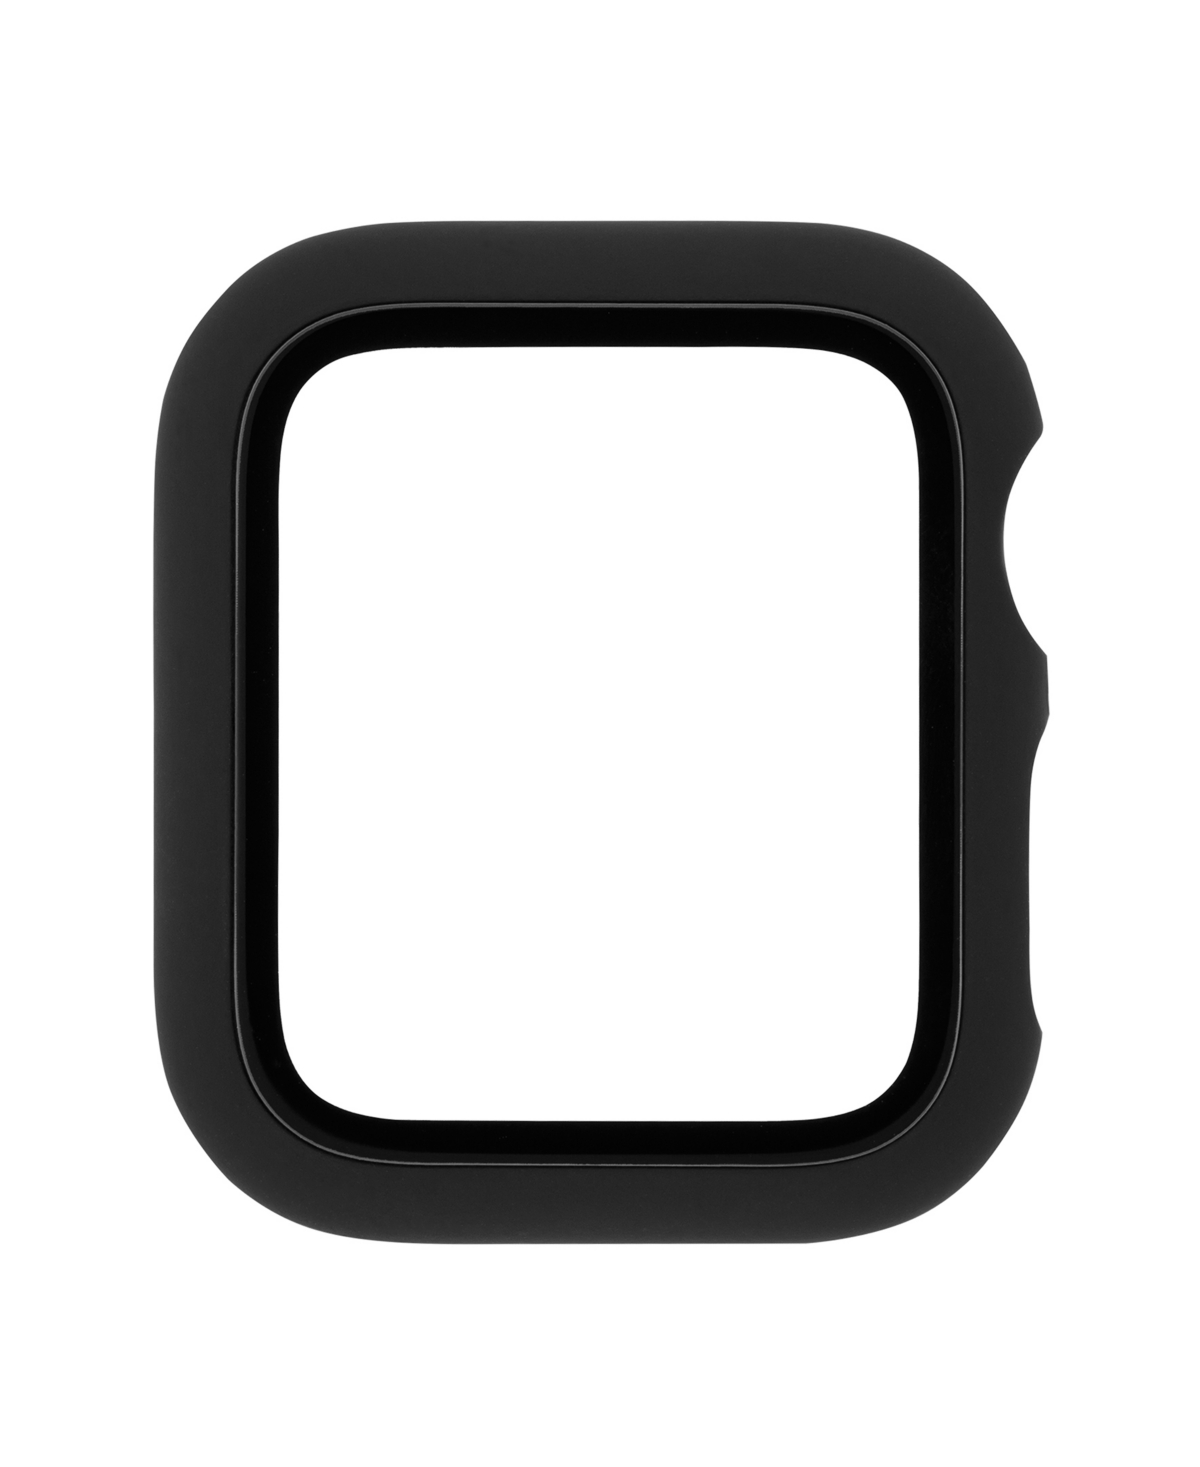 Withit Black Full Protection Bumper With Glass For 49mm Apple Watch